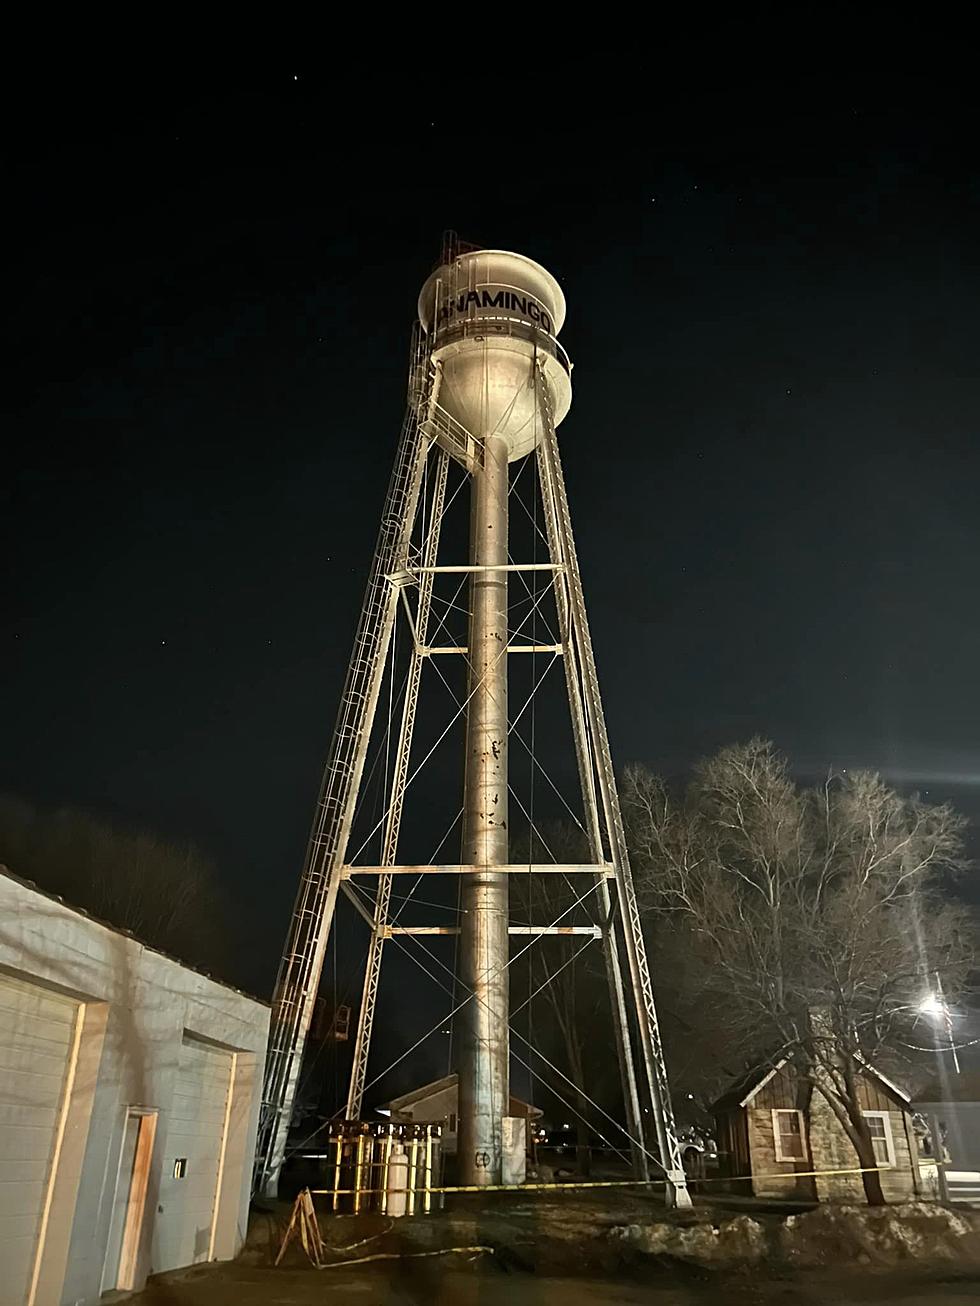 A Shout Out To All Those Small Town Water Towers and What They Mean